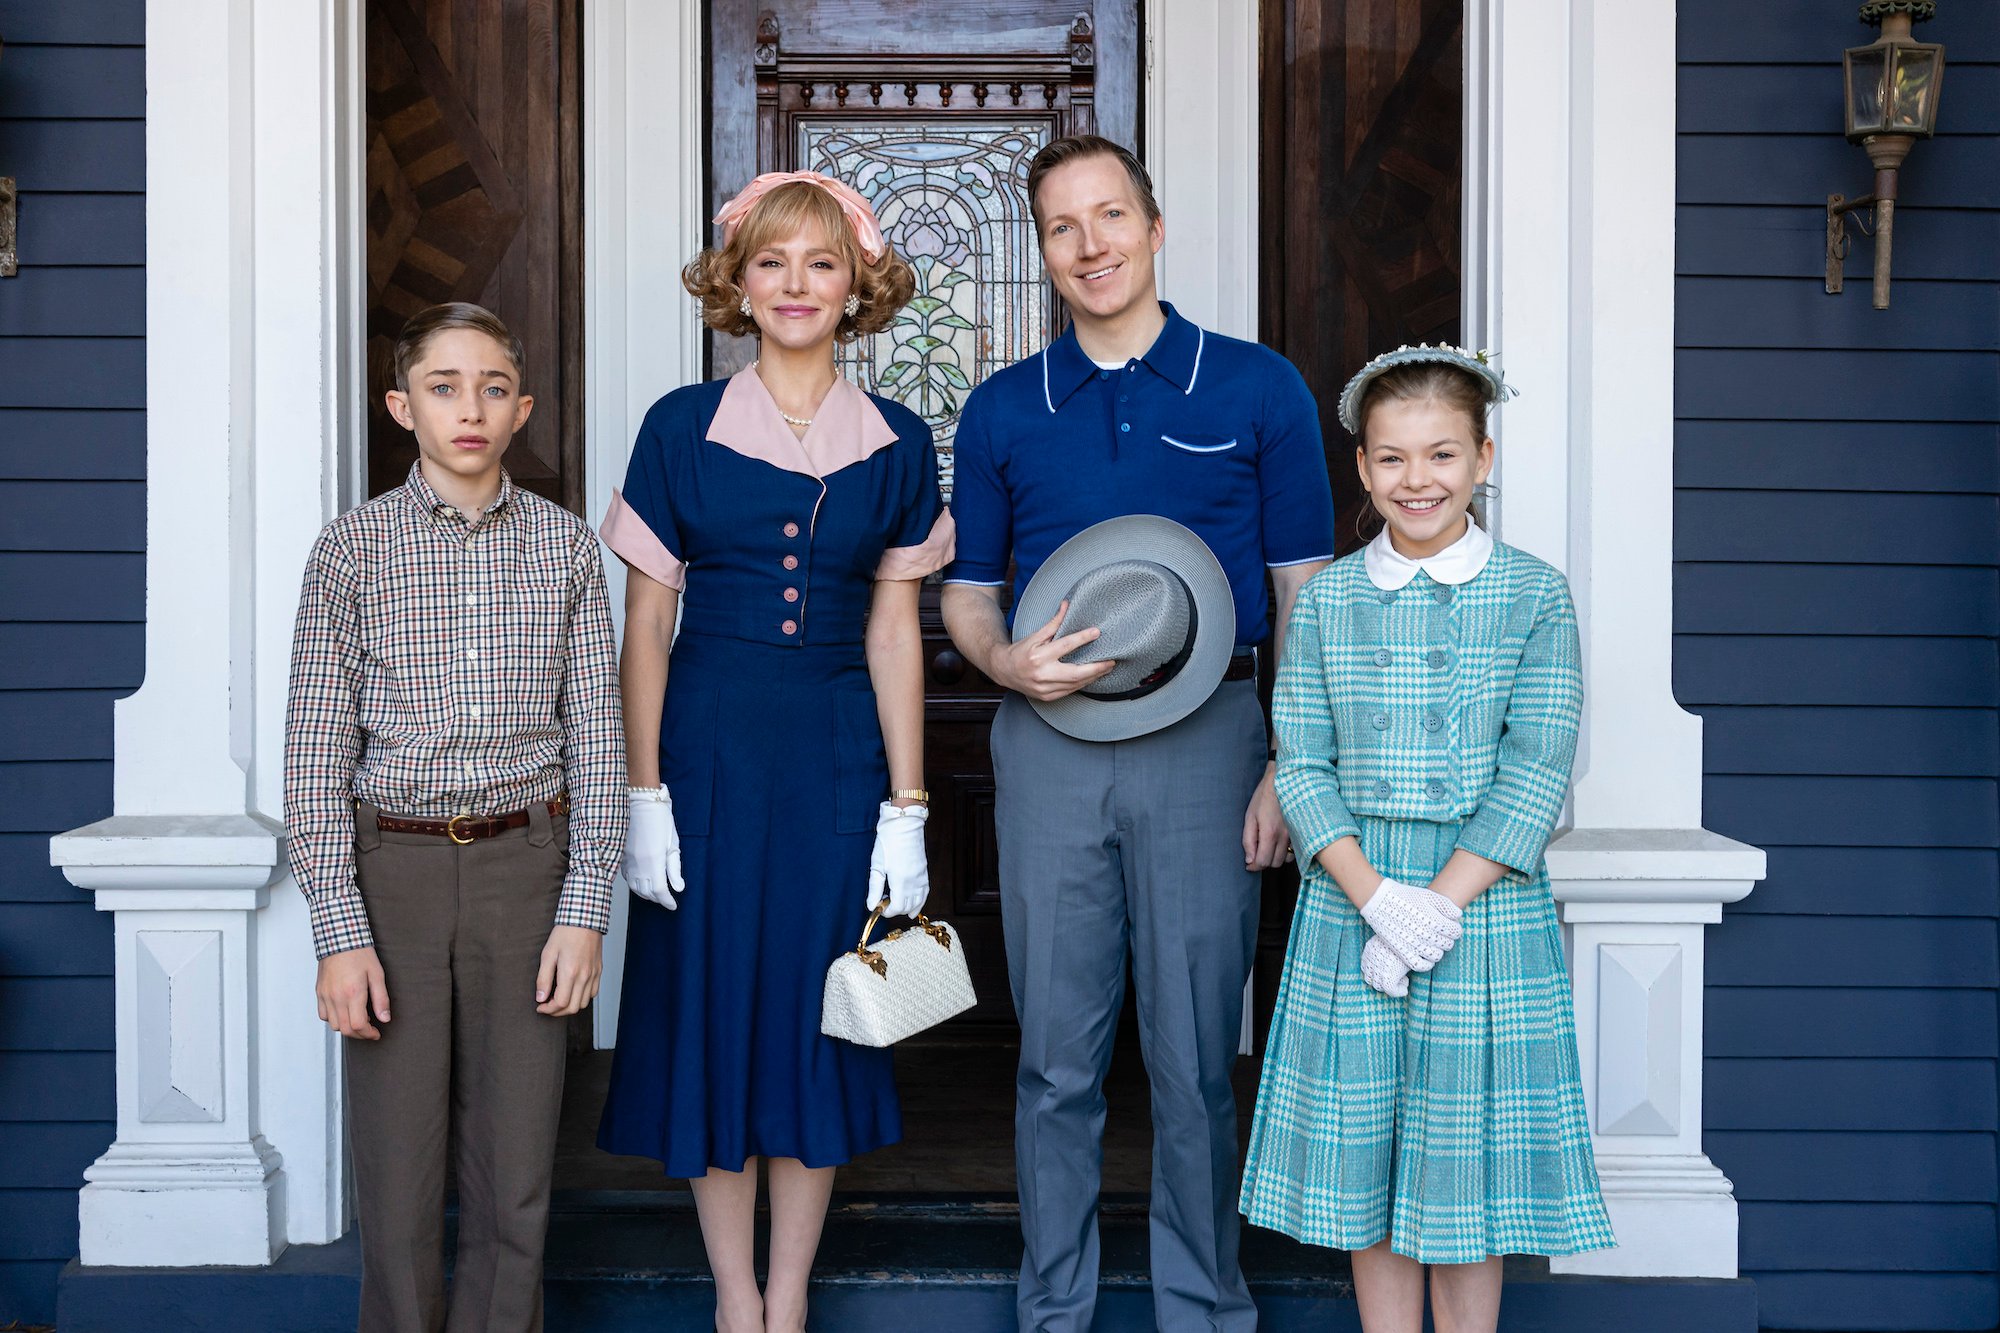 'Stranger Things 4' characters Henry Creel, Virginia Creel, Victor Creel, and Alice Creel stand in front of their home in a production still.